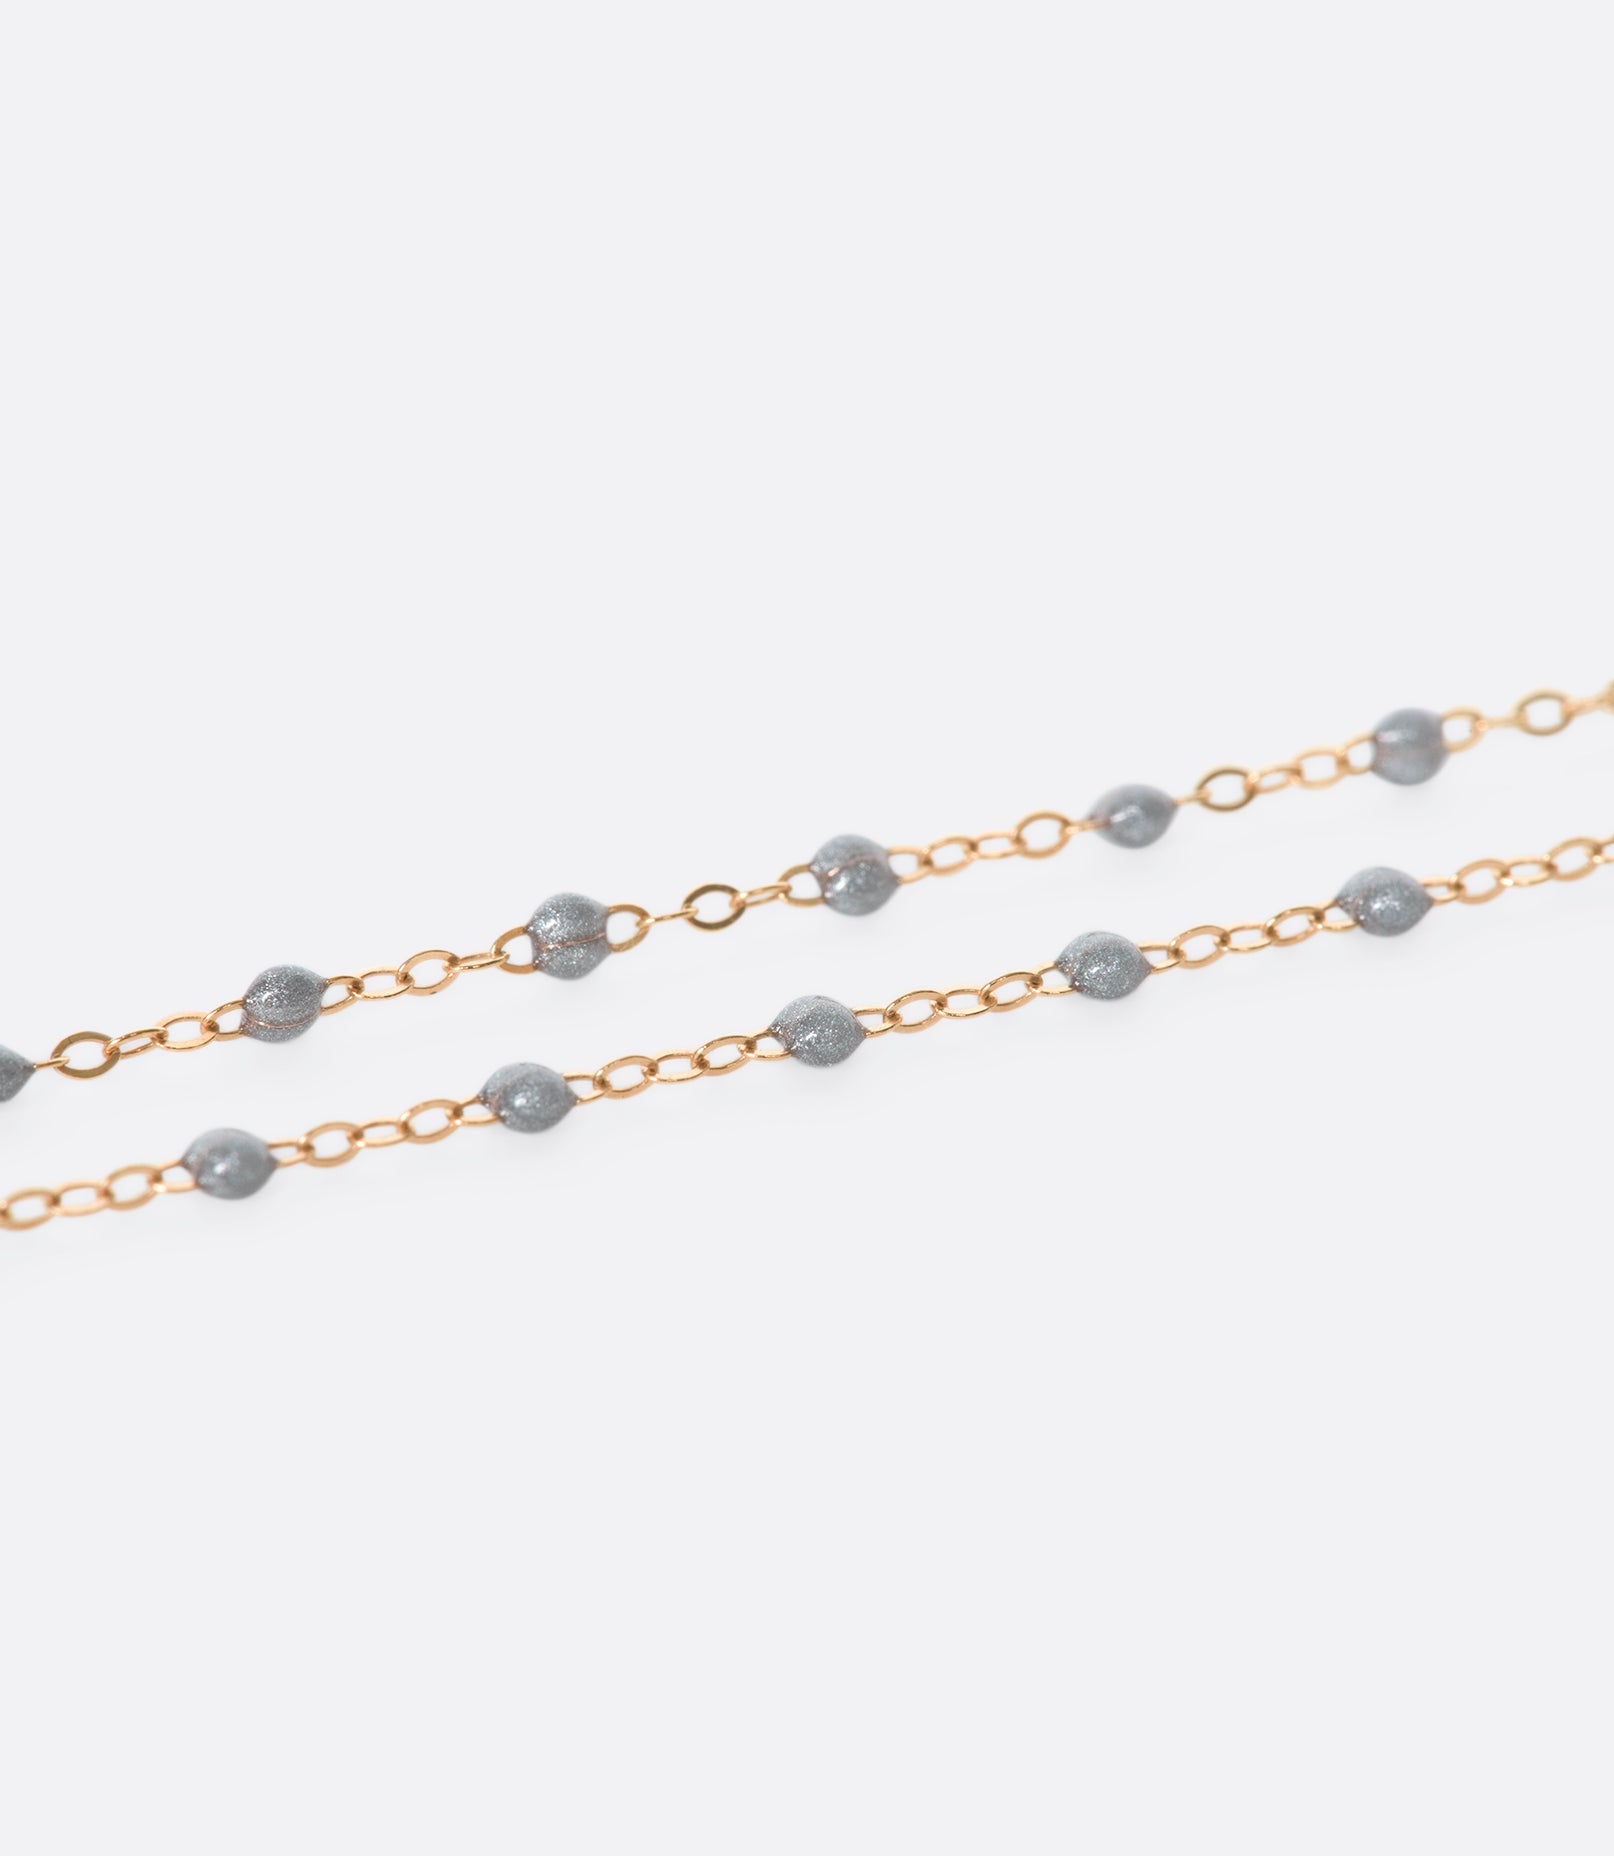 Thin 18k yellow gold chain necklace with resin beads. Each necklace is hand dipped in melted resin to create the beaded effect. 